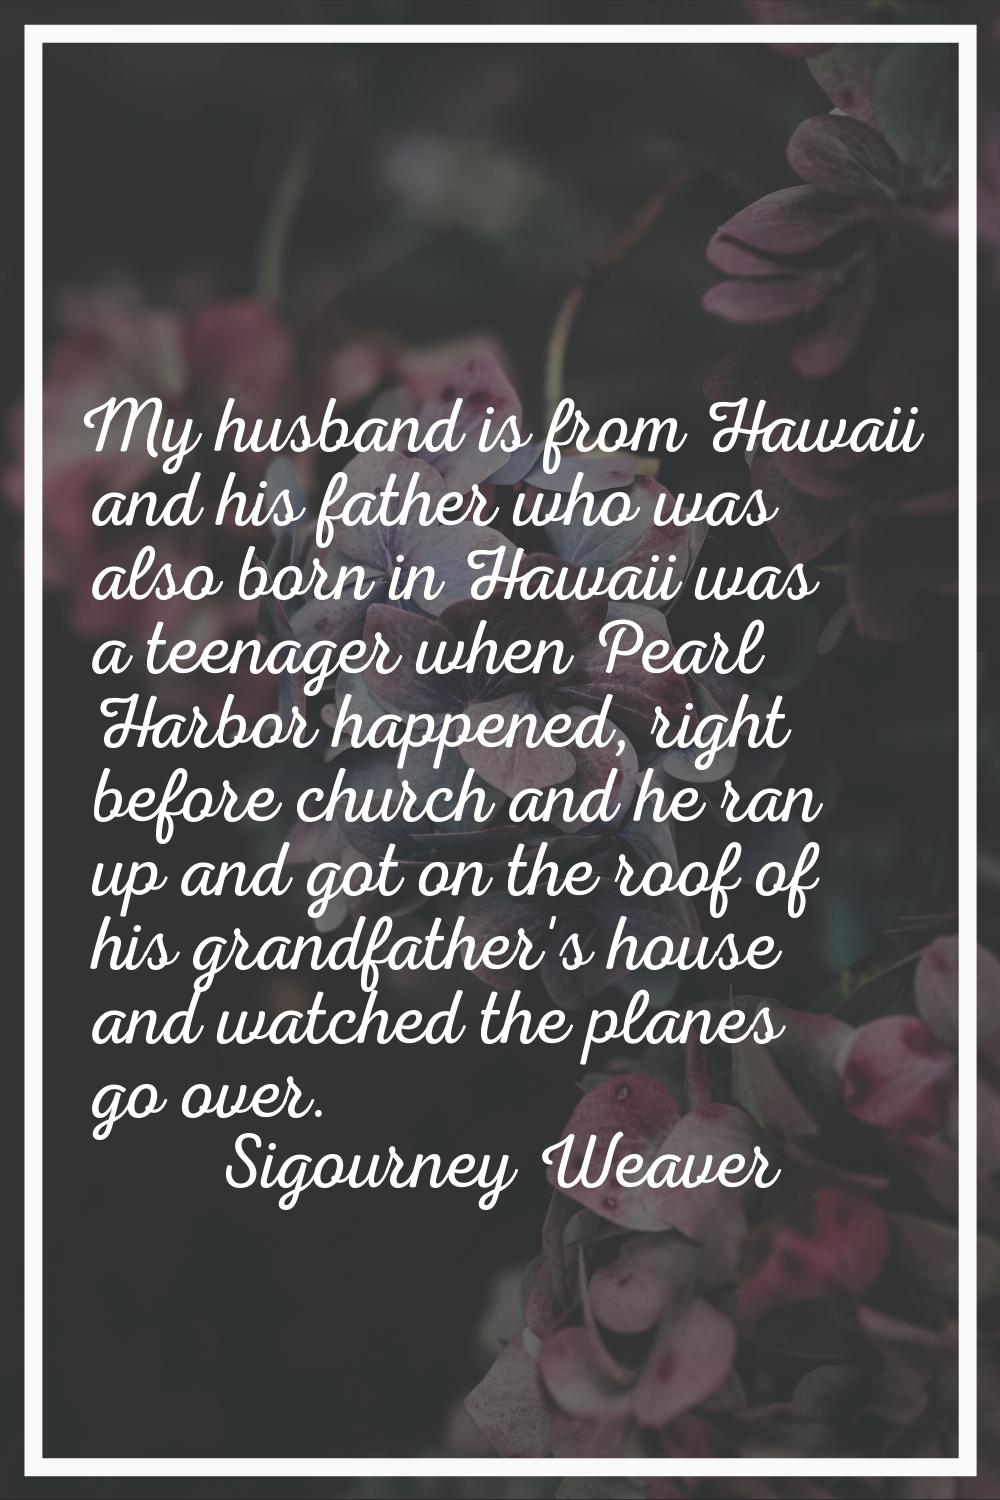 My husband is from Hawaii and his father who was also born in Hawaii was a teenager when Pearl Harb